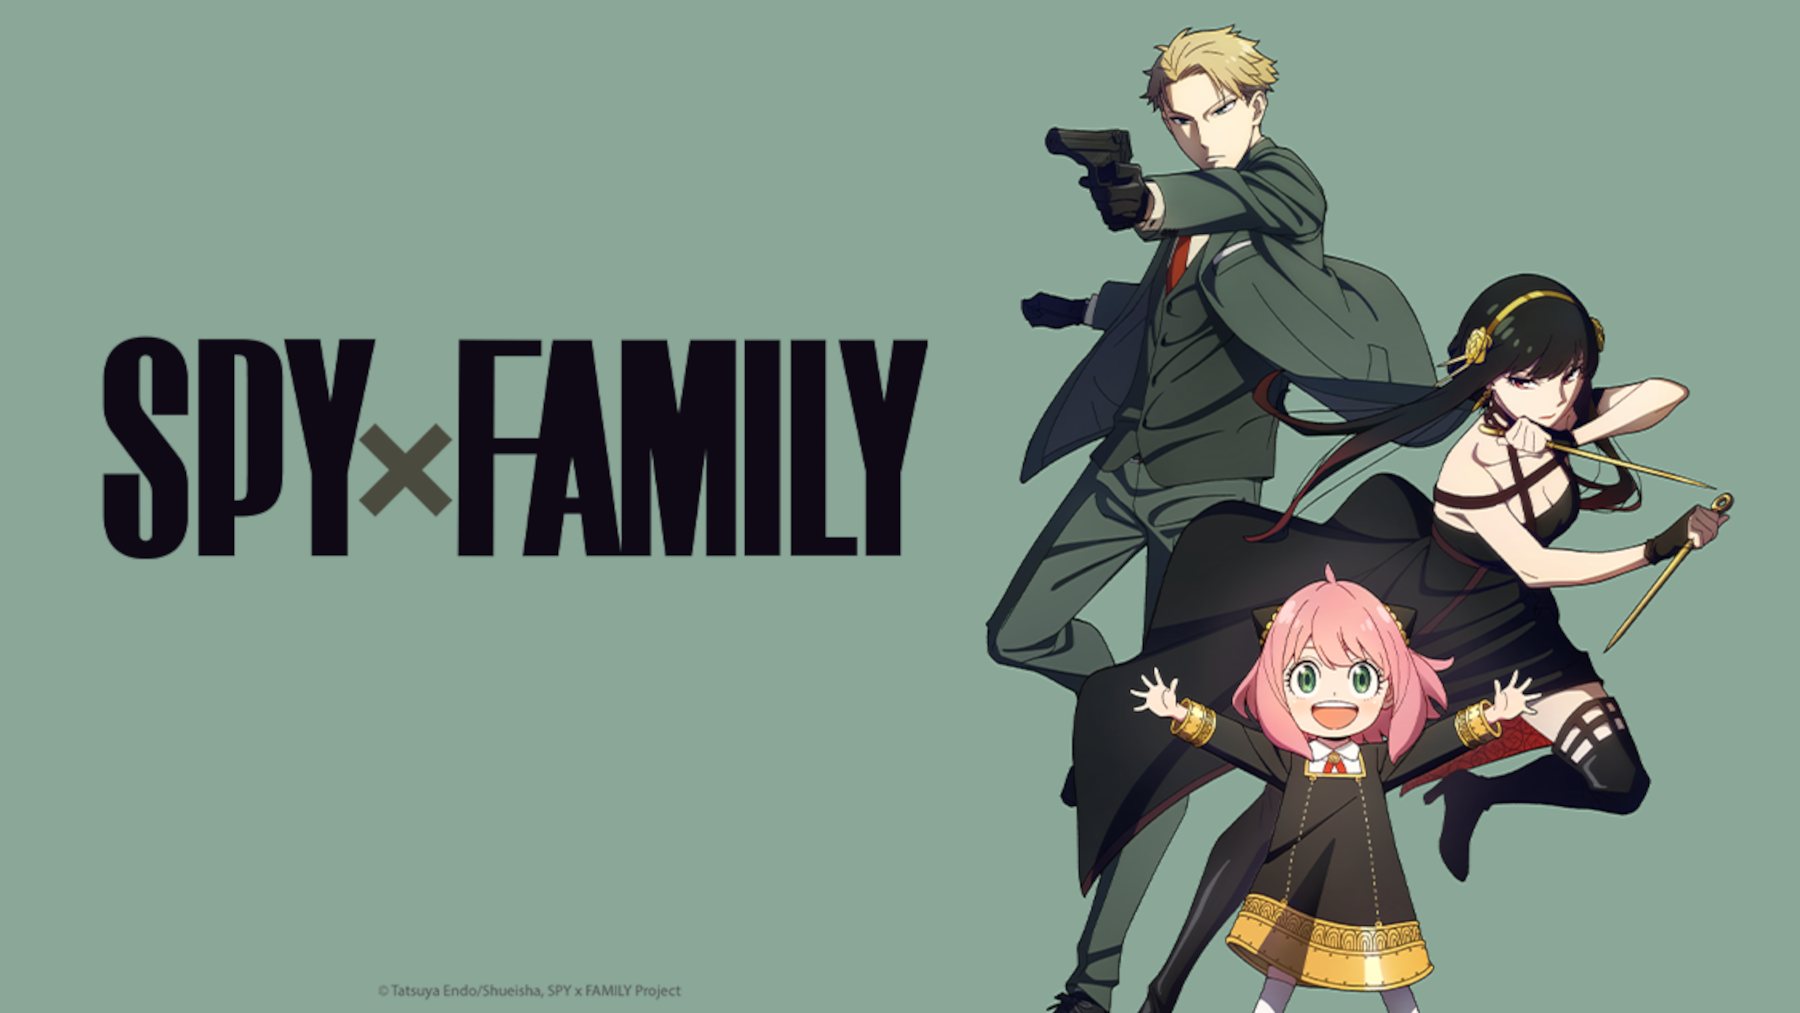 Key art for new 2022 anime 'Spy x Family.' It shows a father, mother, and pink-haired girl in their spy get-ups.